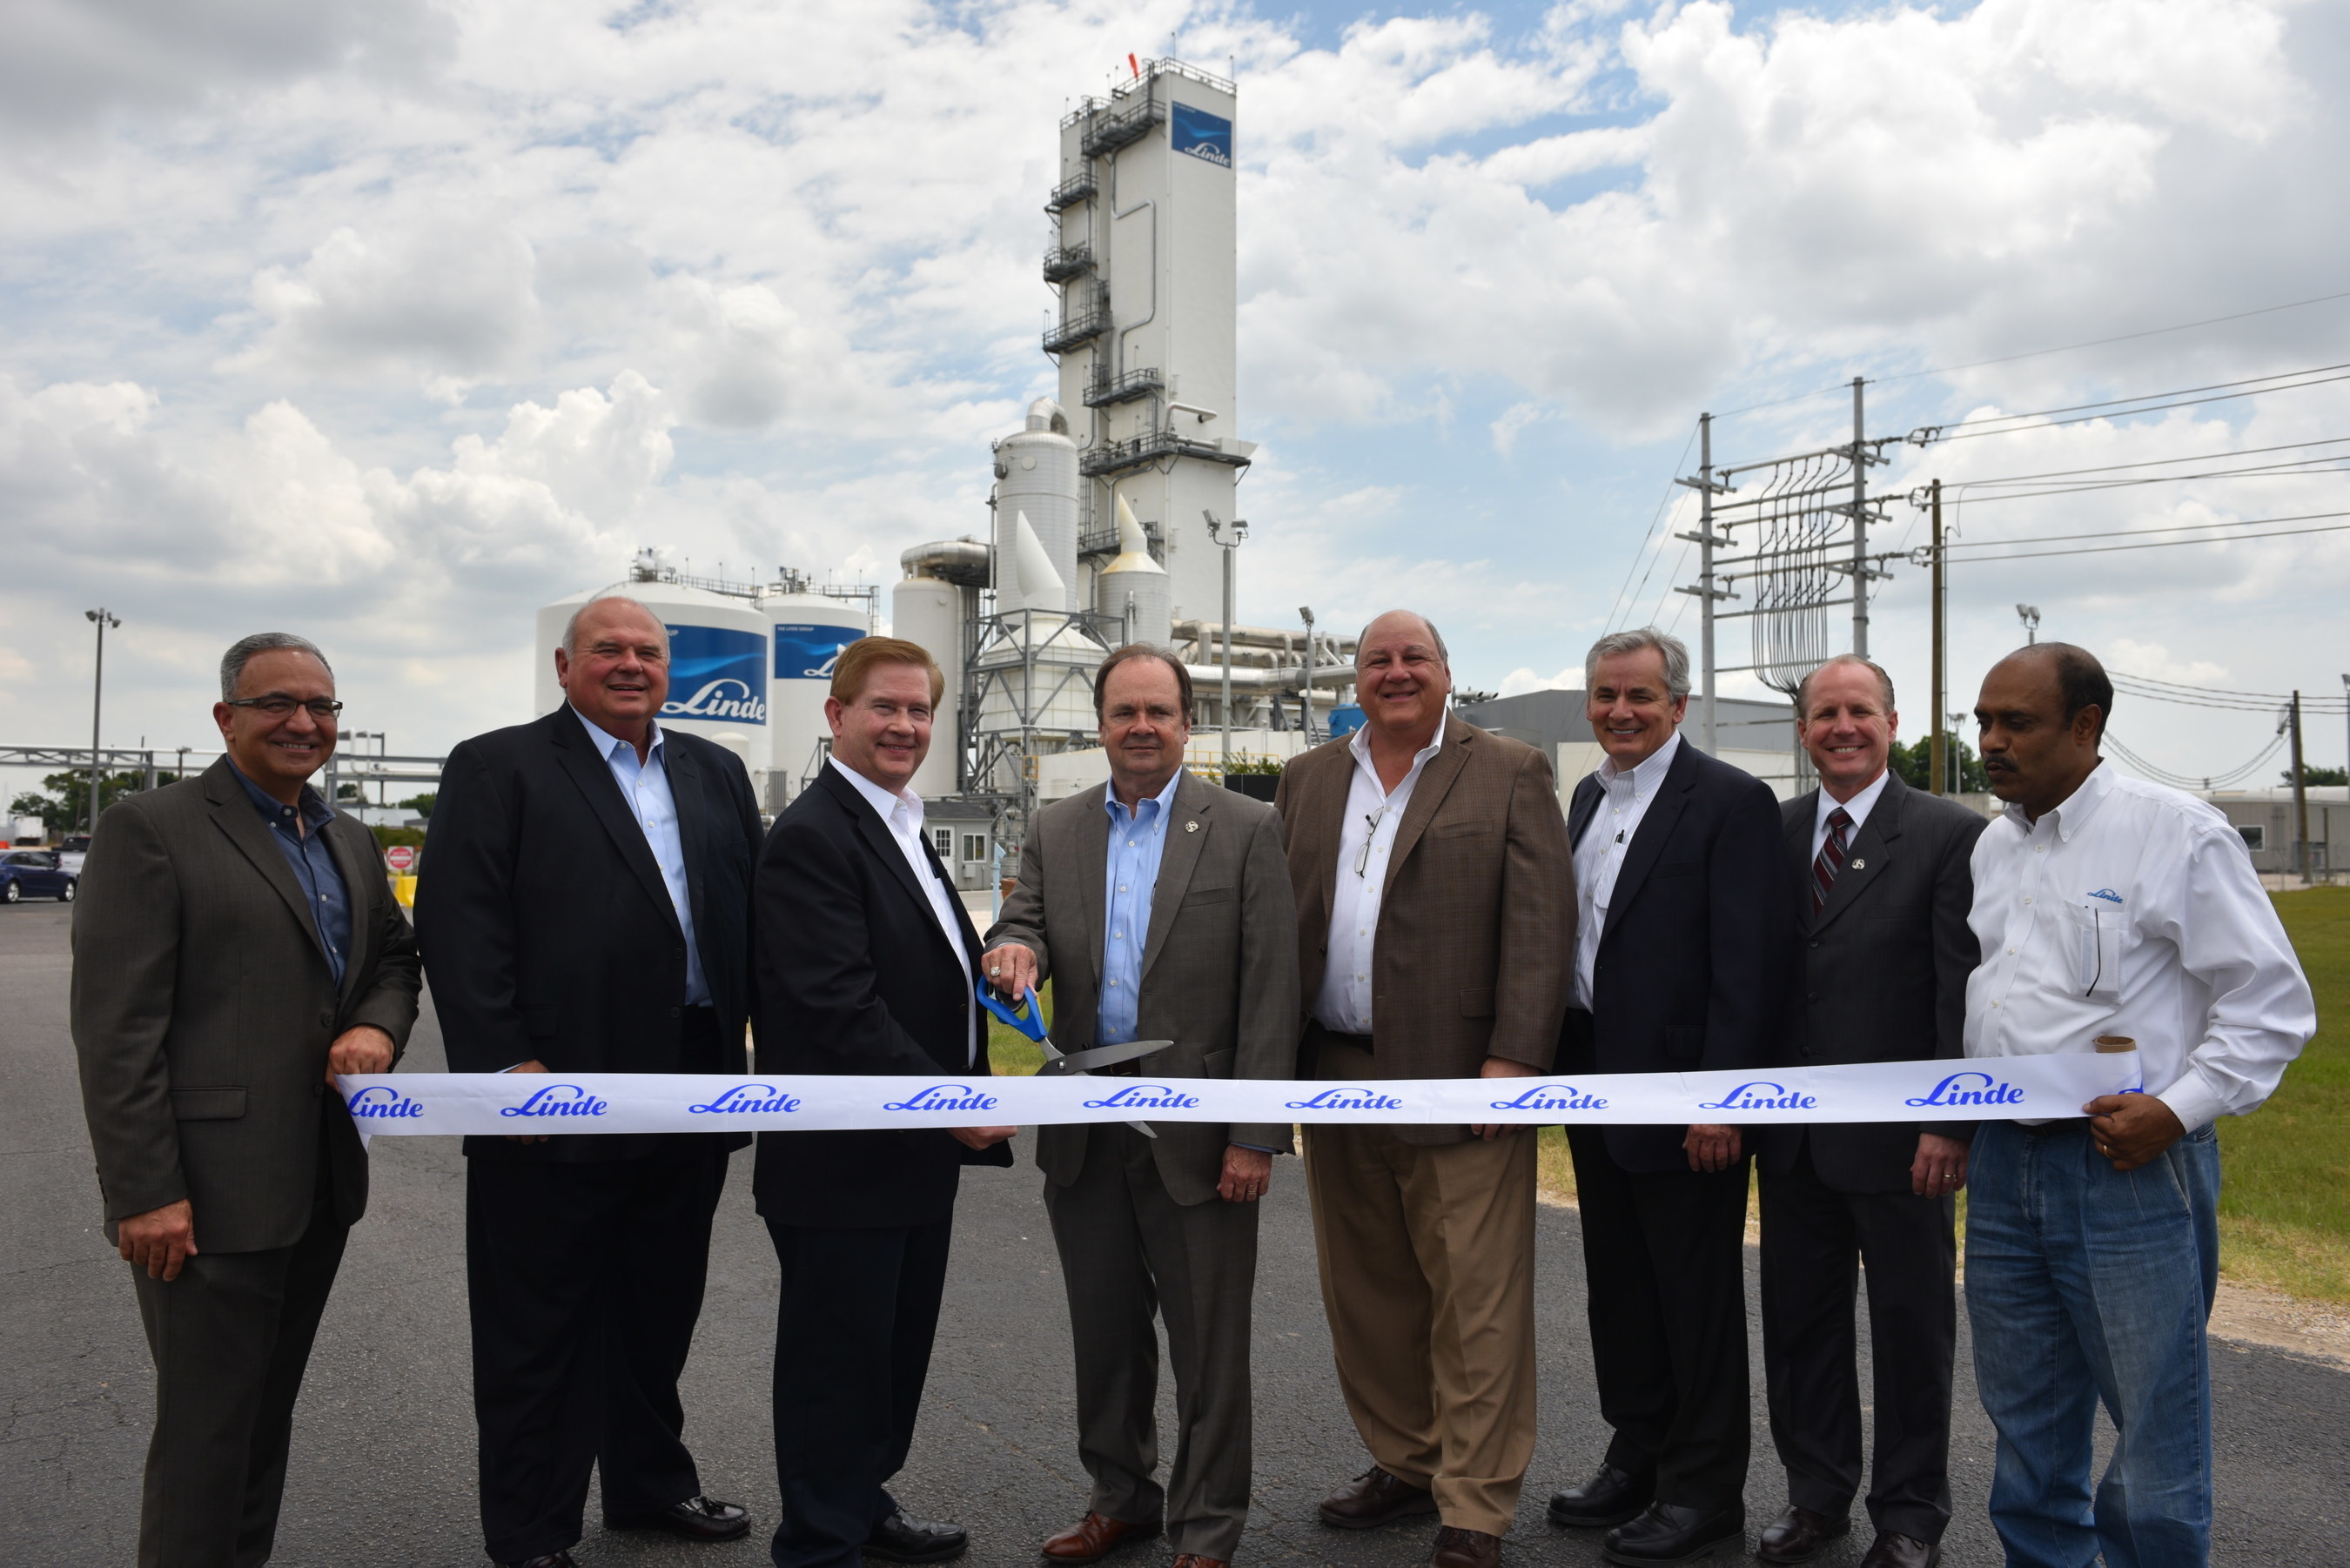 Linde executives and local officials cut the ribbon on the company's new ASU in La Porte, Texas.